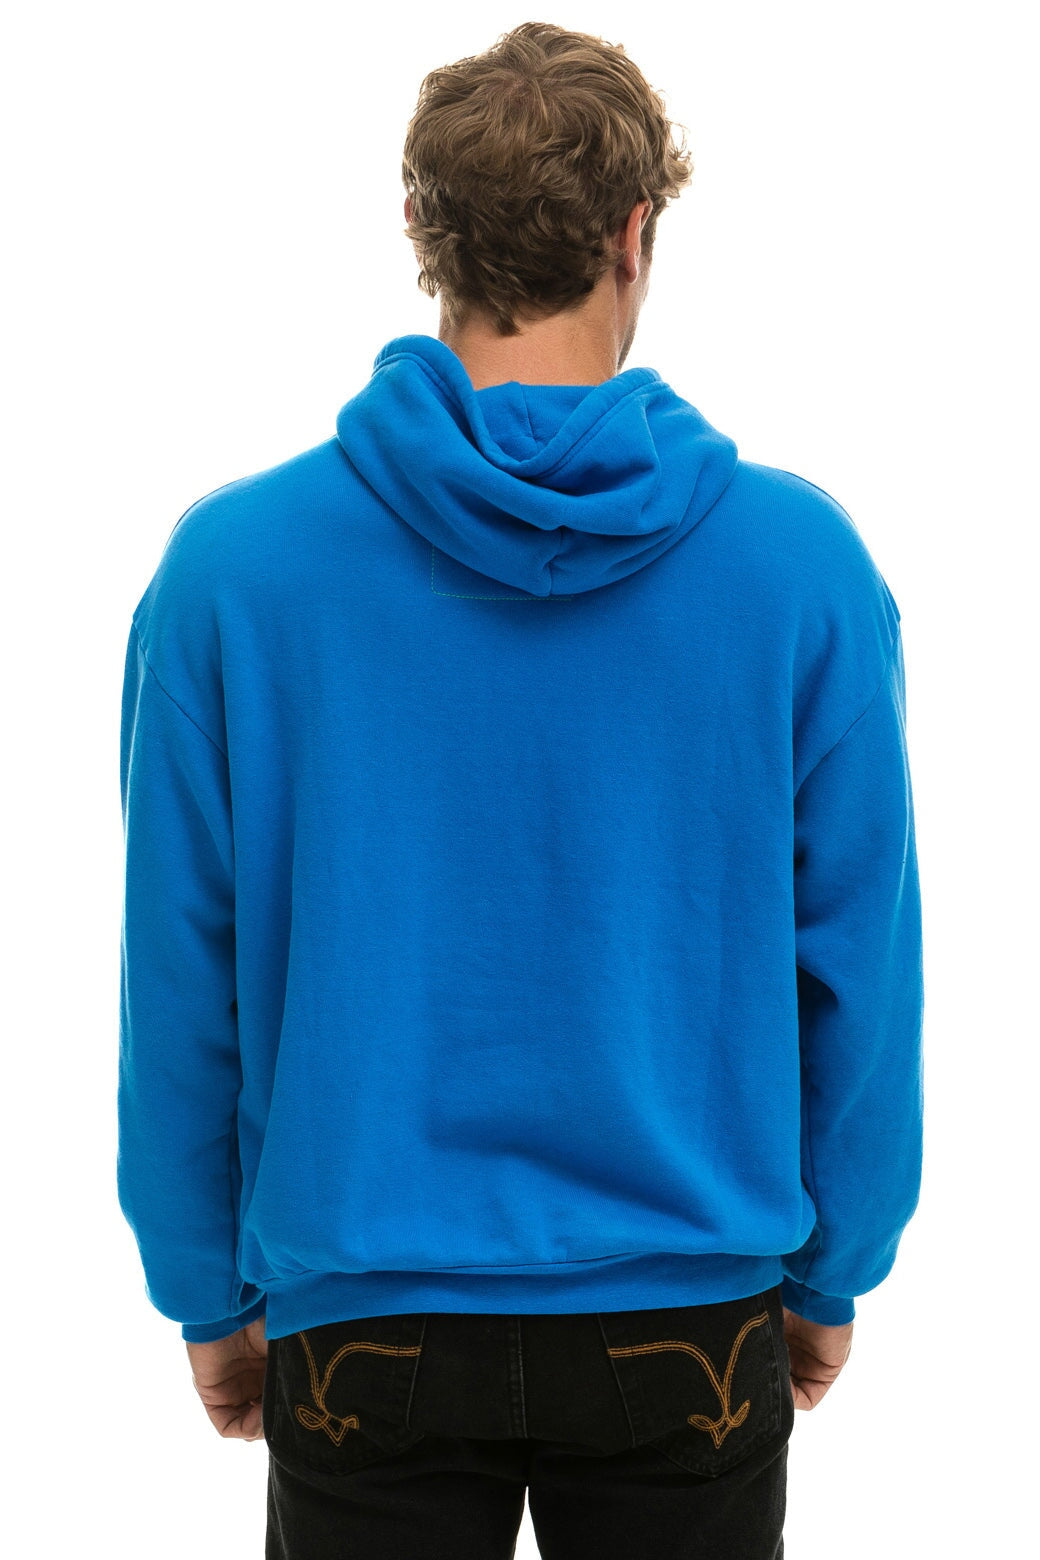 LOCALS ONLY RELAXED PULLOVER HOODIE - OCEAN Hoodie Aviator Nation 